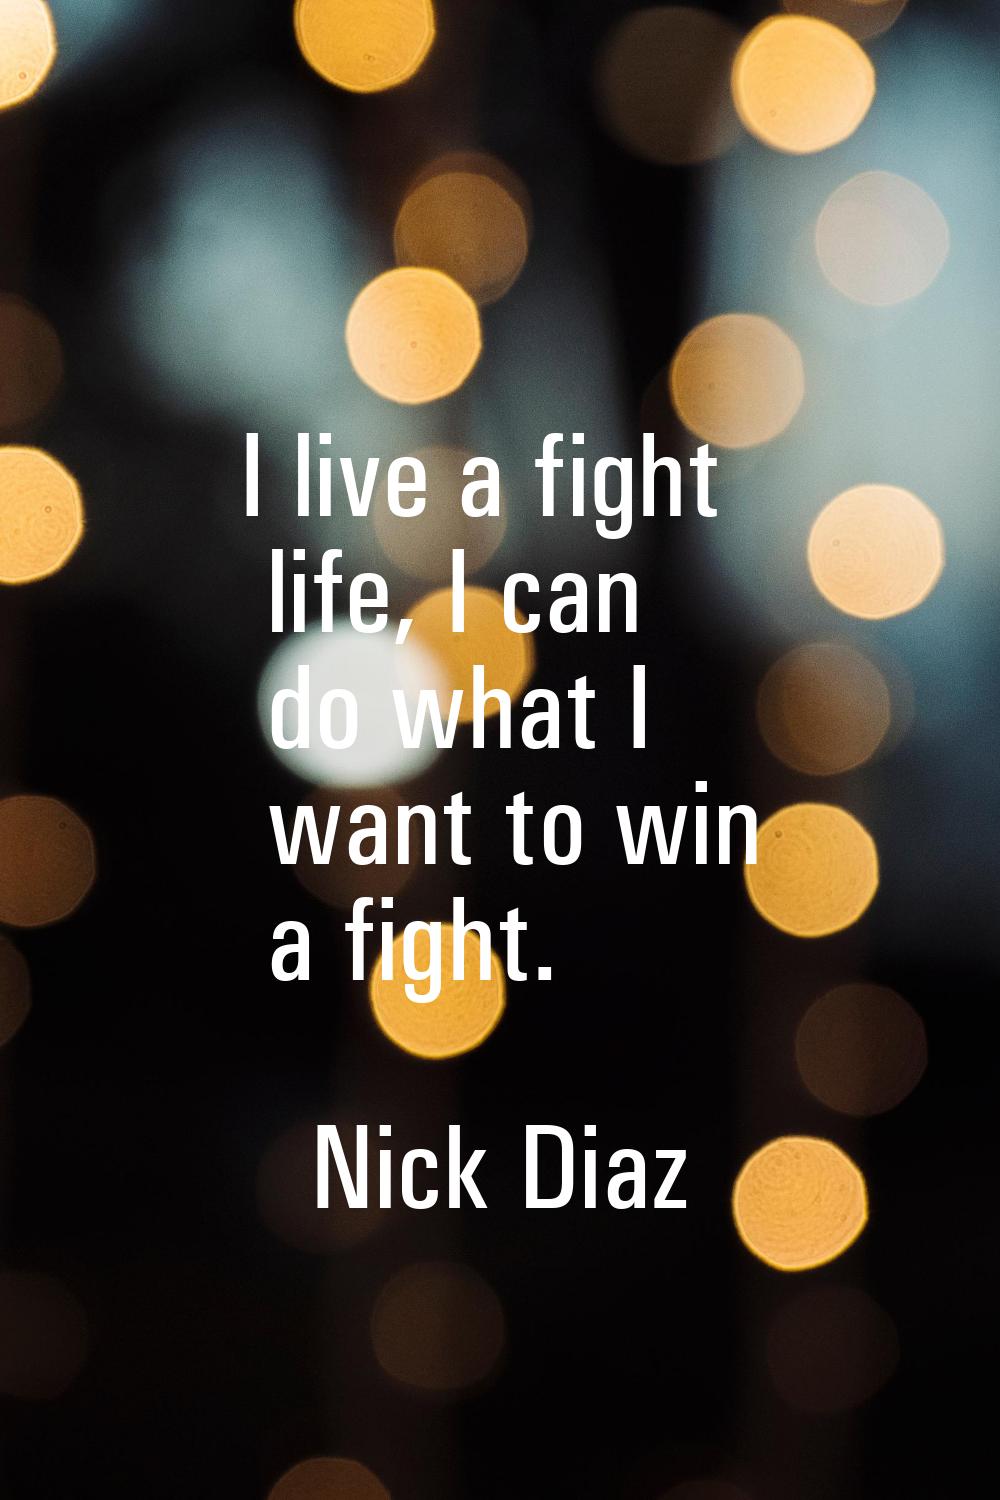 I live a fight life, I can do what I want to win a fight.